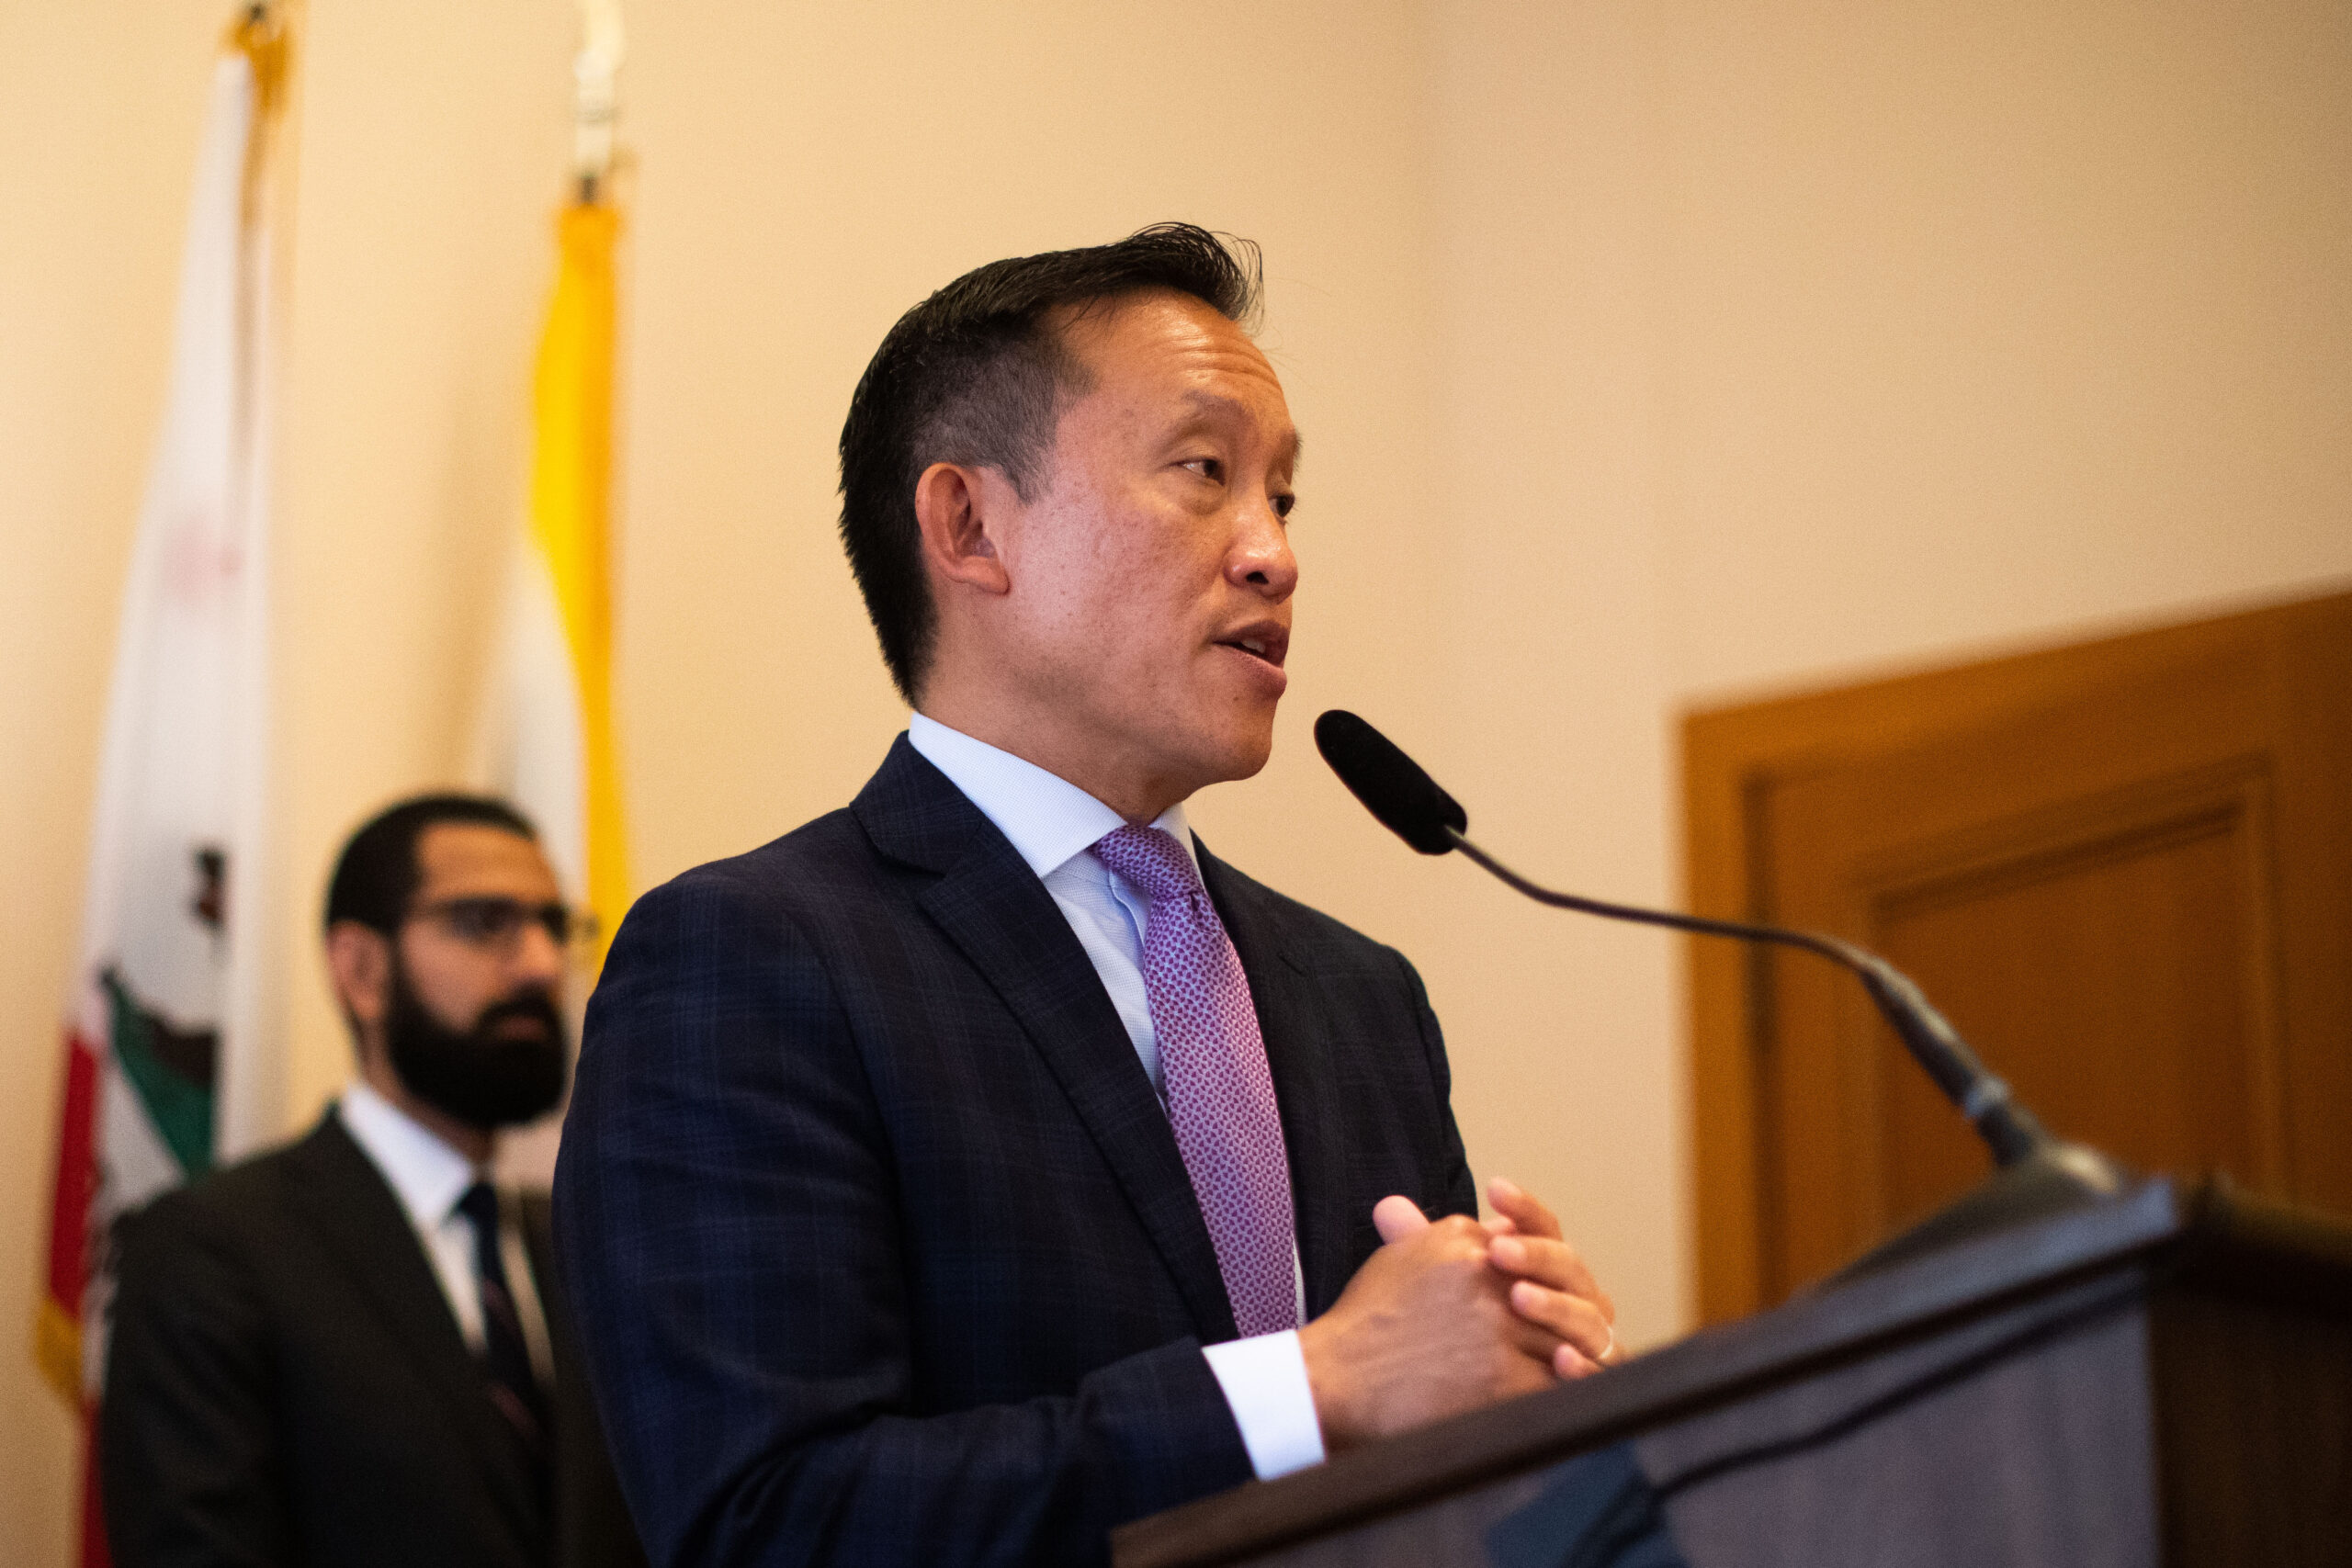 City Attorney David Chin speaks behind a podium in a conference room at San Francisco City Hall. 